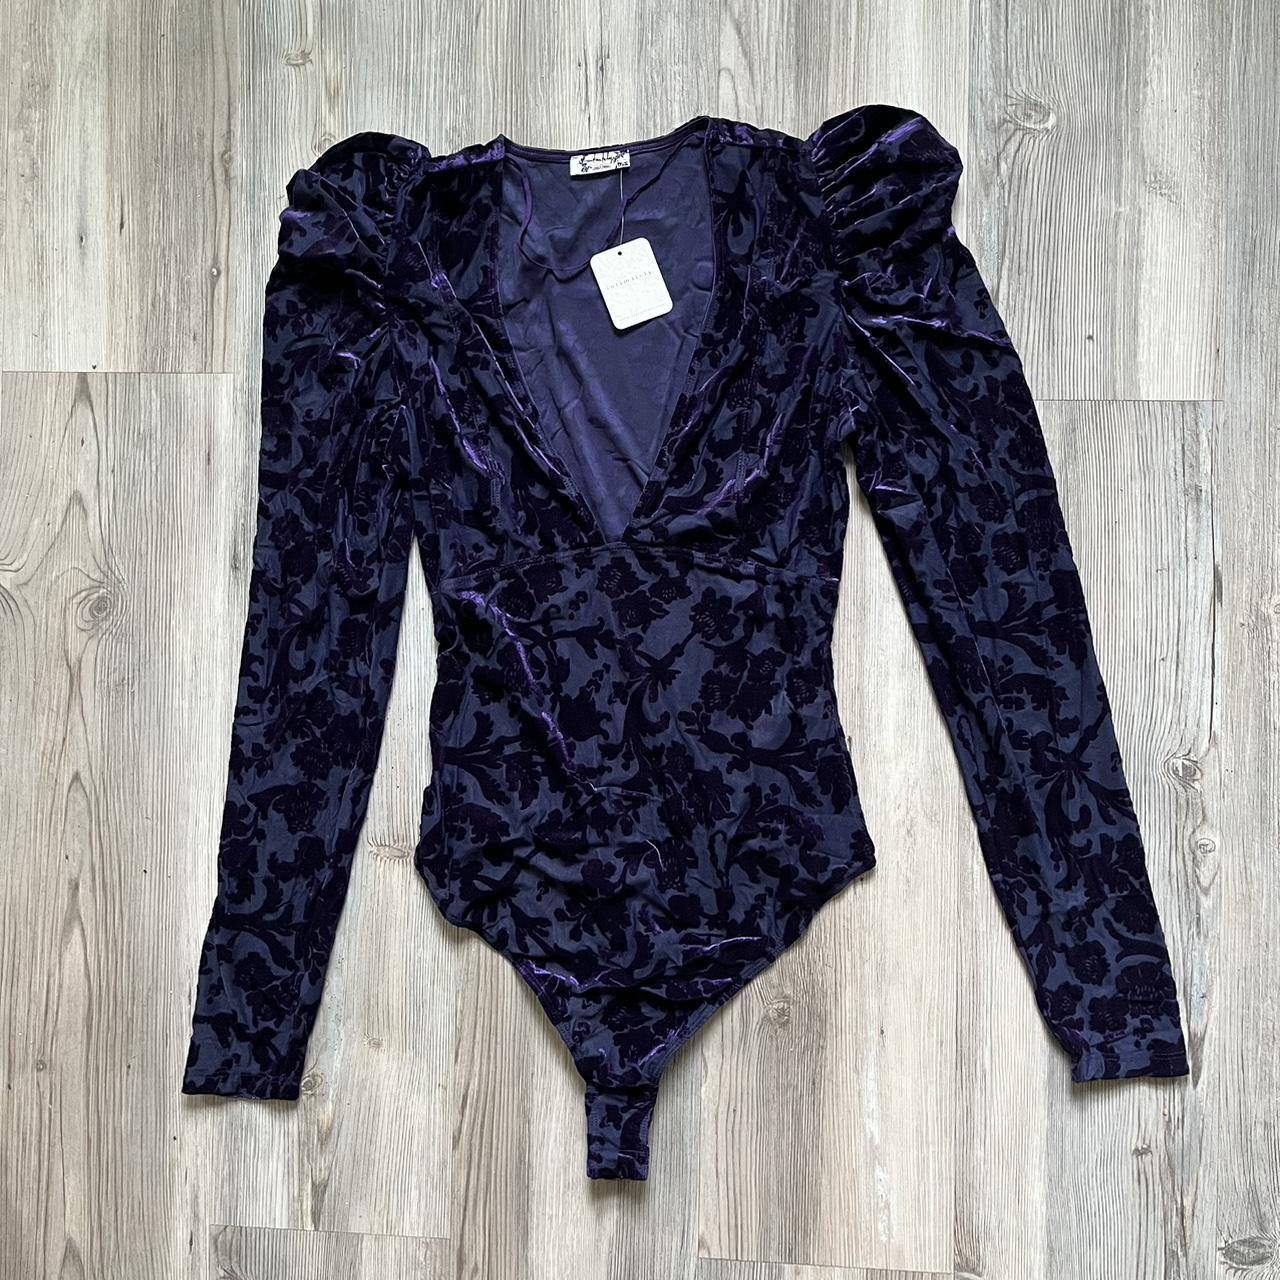 FREE PEOPLE Magic Hour Velvet Bodysuit in Deep Sea NWT Size Small